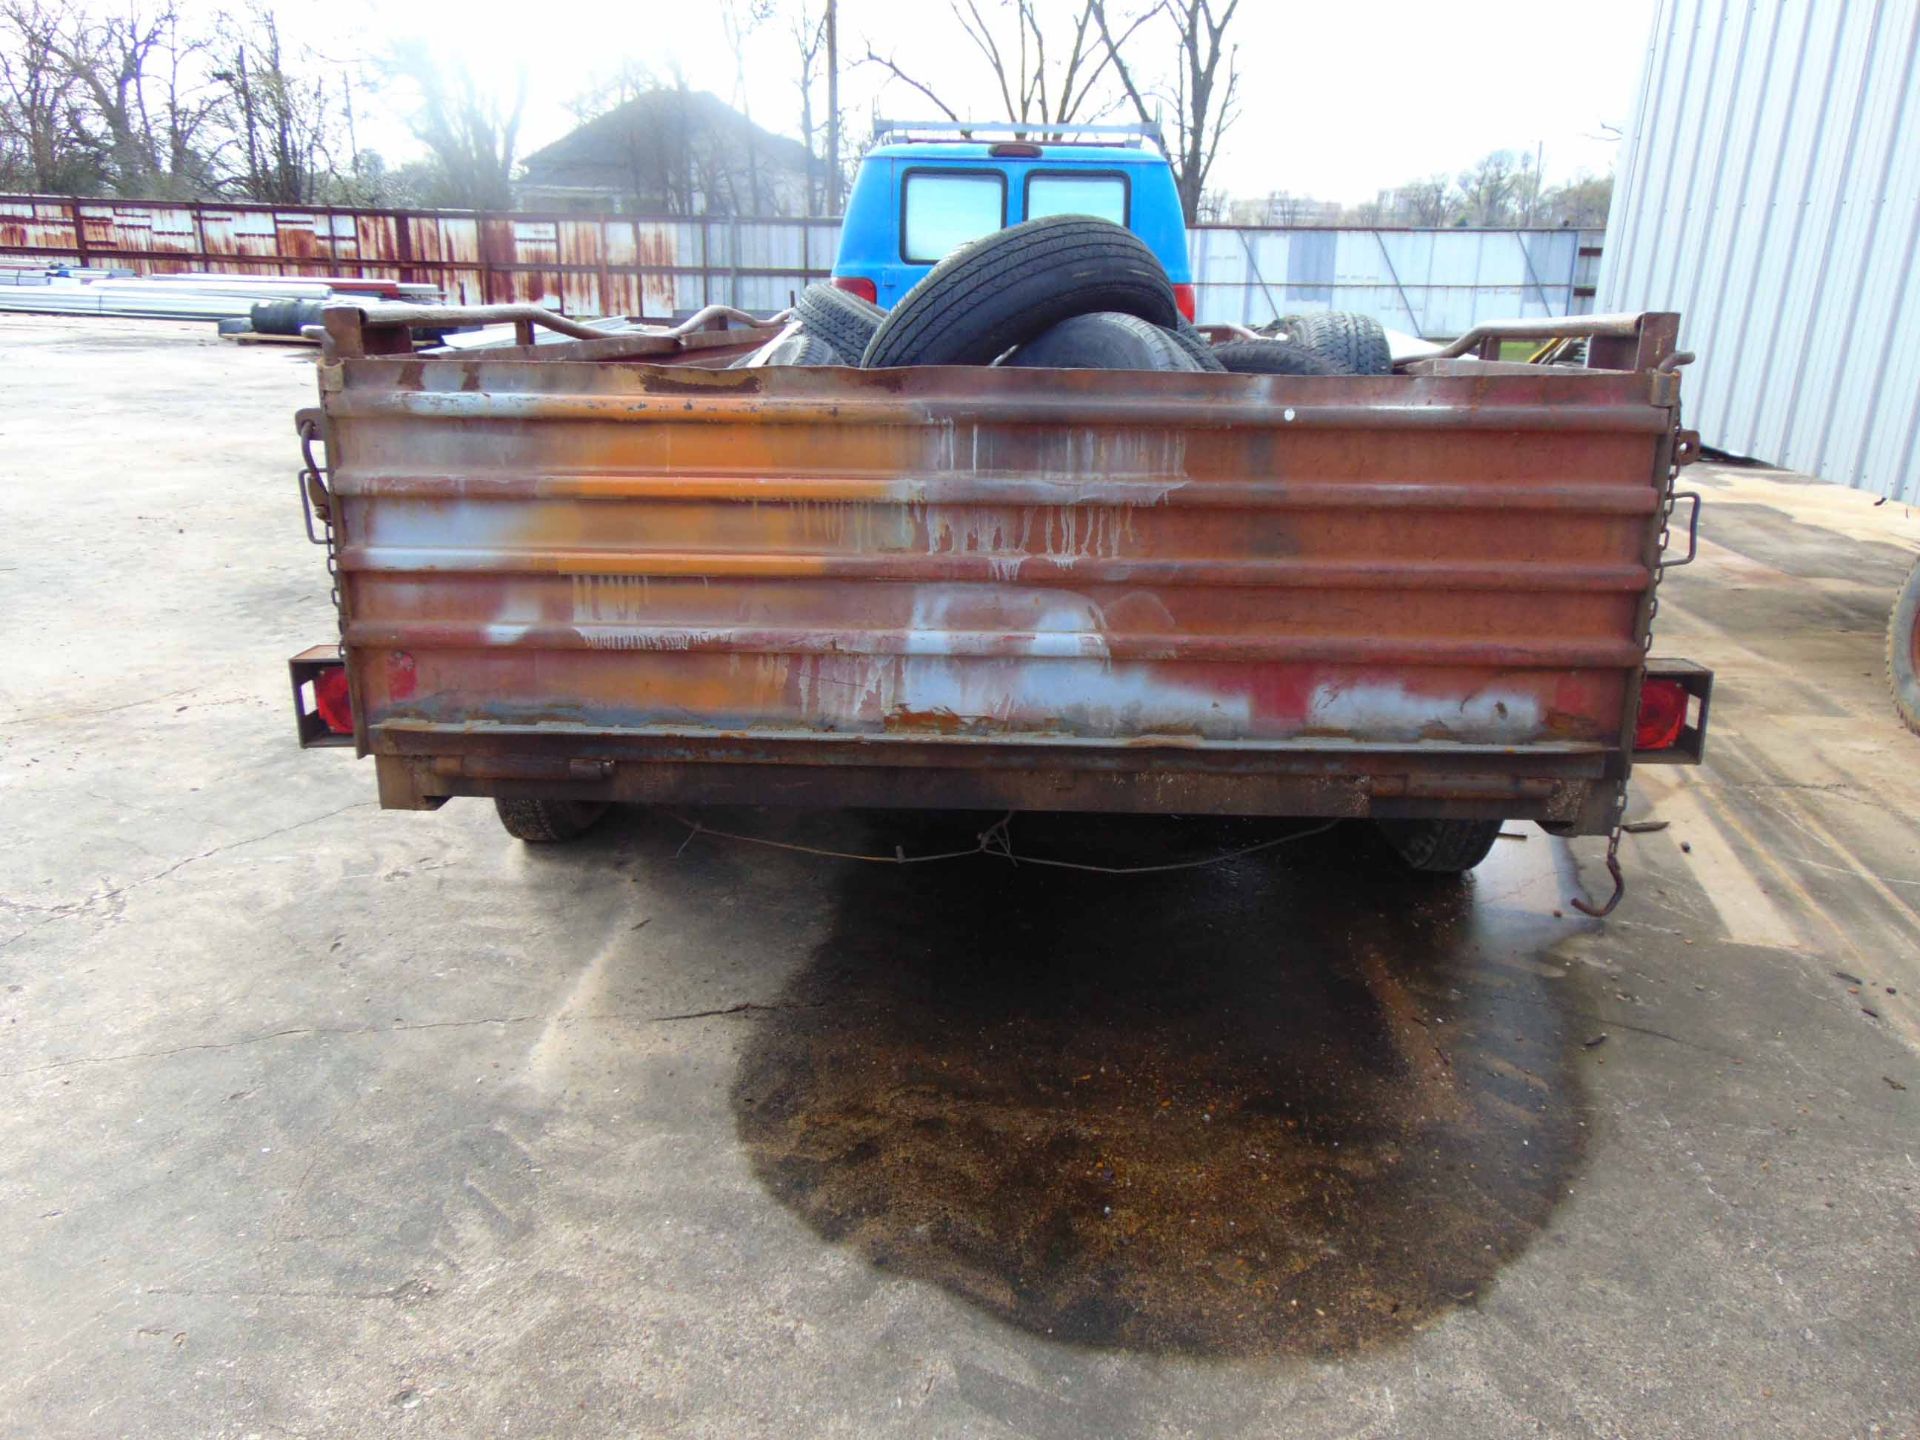 UTILITY TRAILER, 14' x 6' steel bed, tandem axle, TX License No. 866095J, VIN N.A. (cannot be - Image 3 of 6